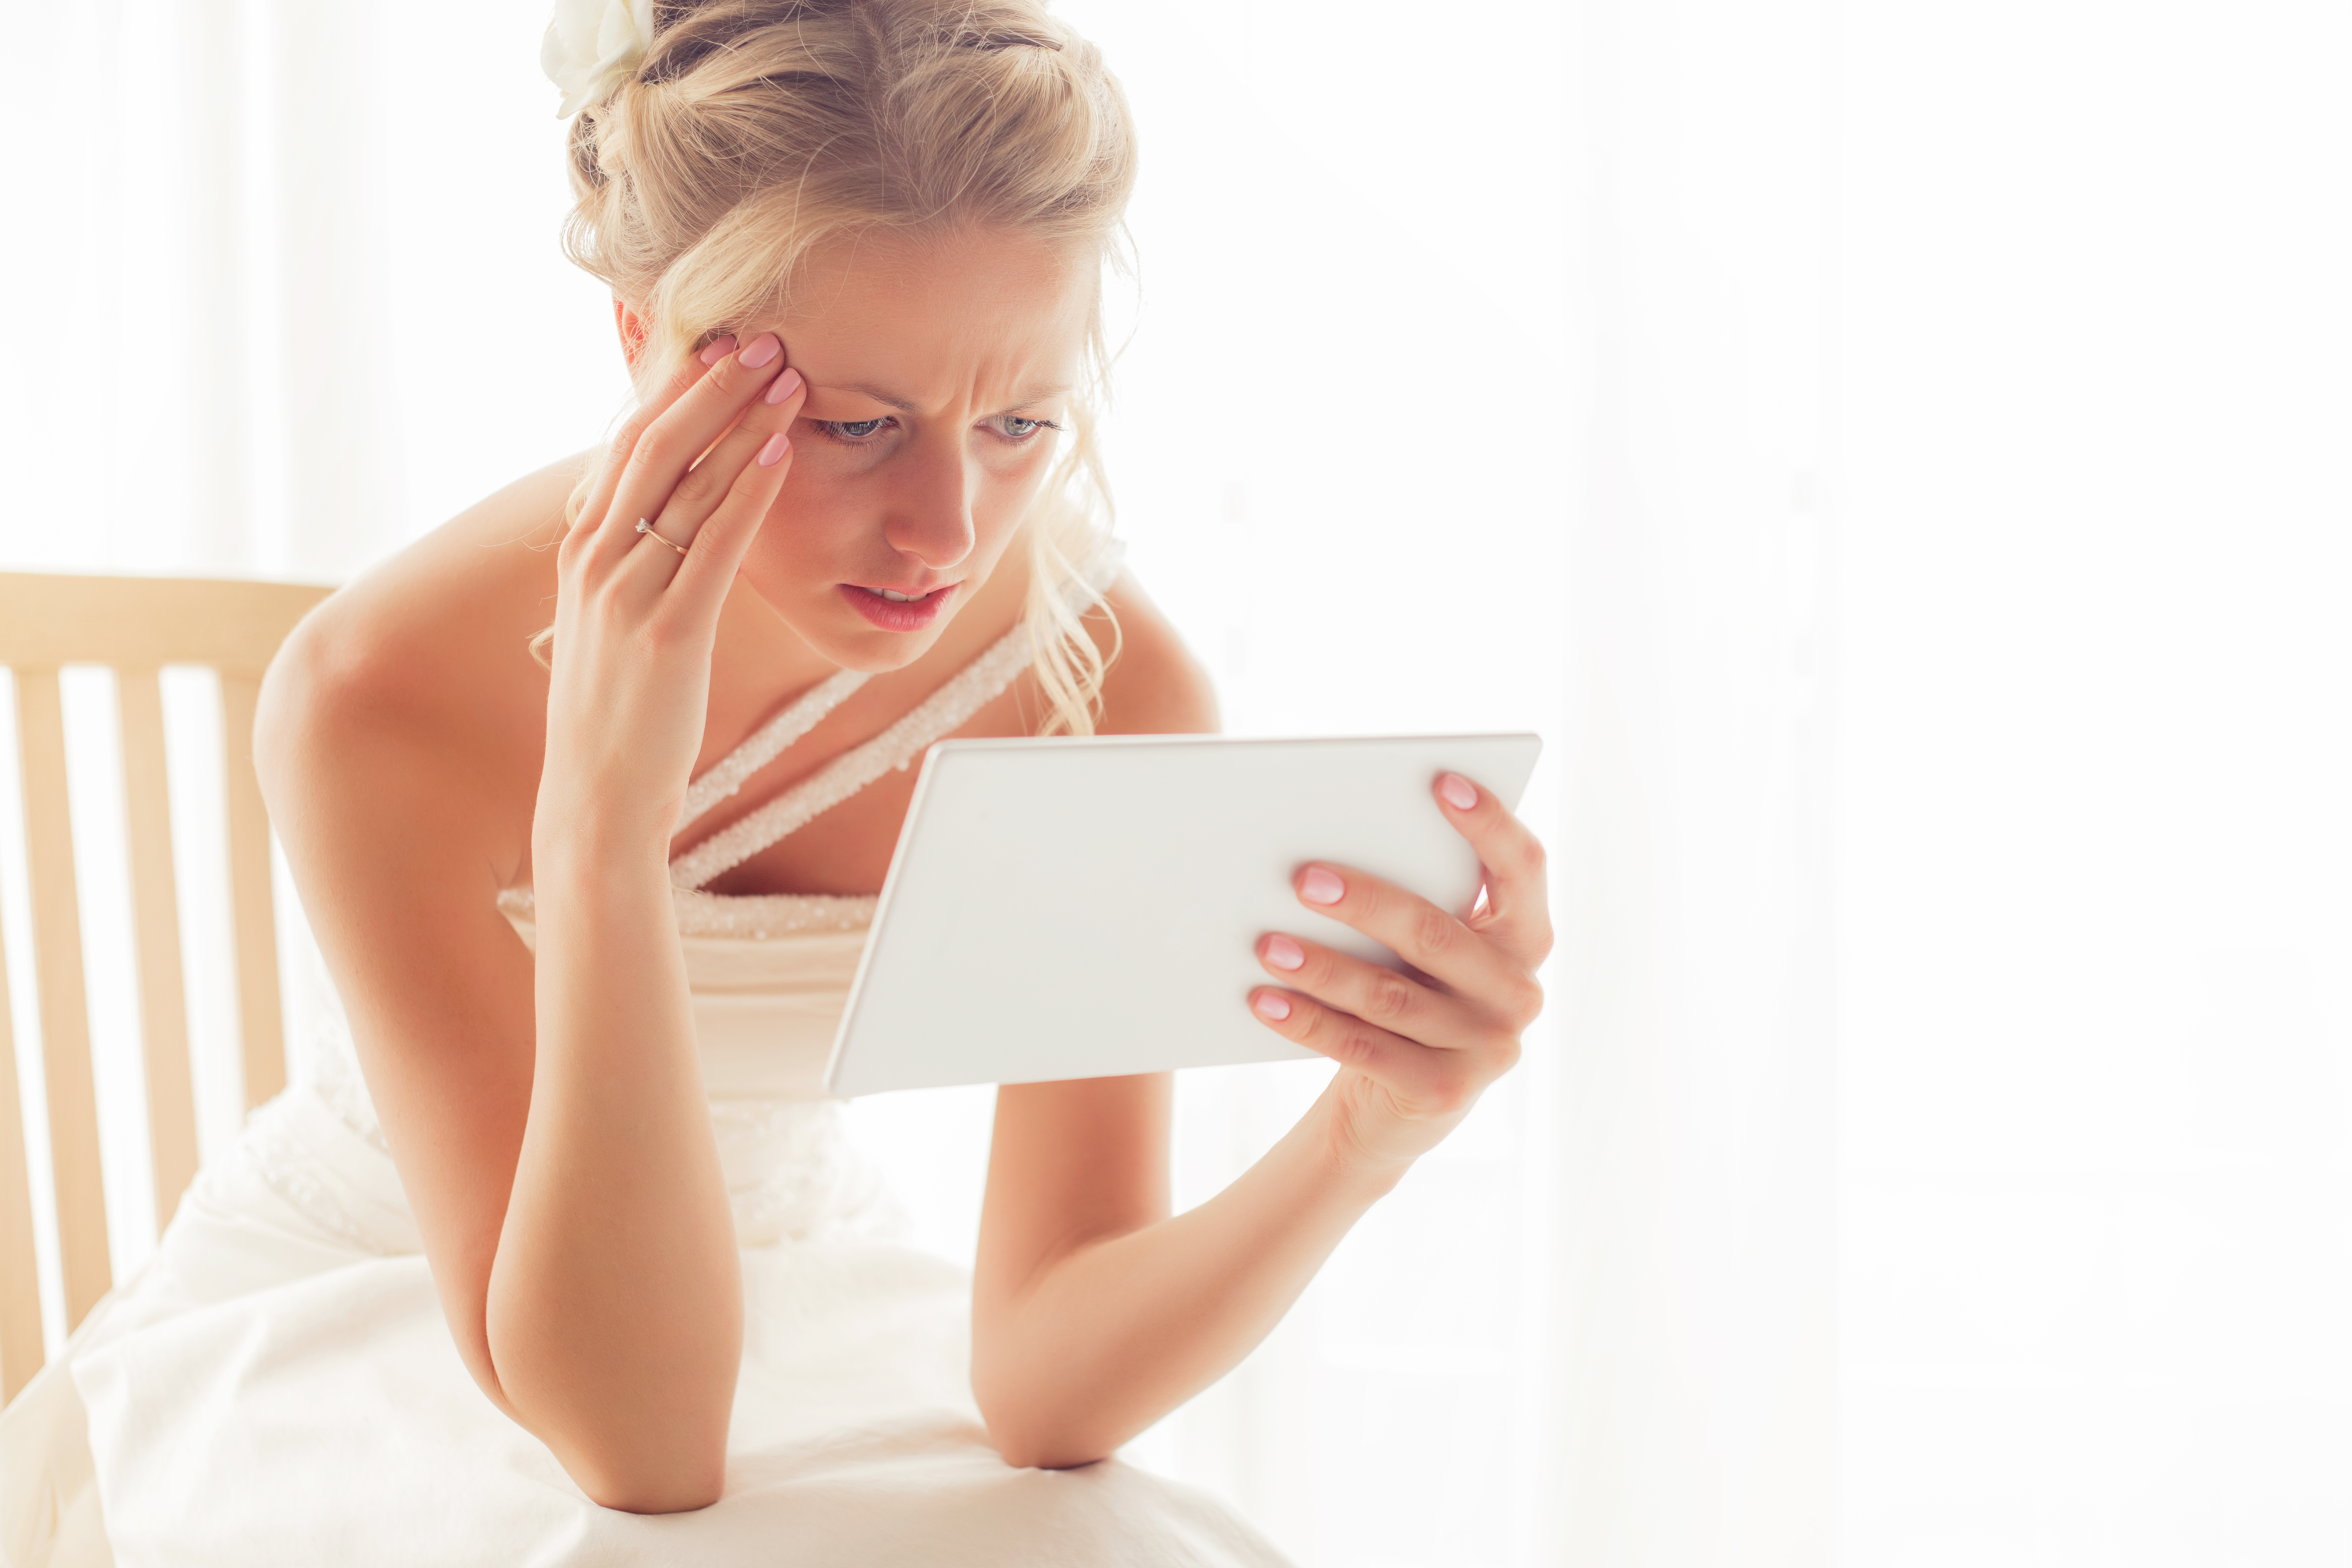 Woman looking at tablet | Source: Shutterstock